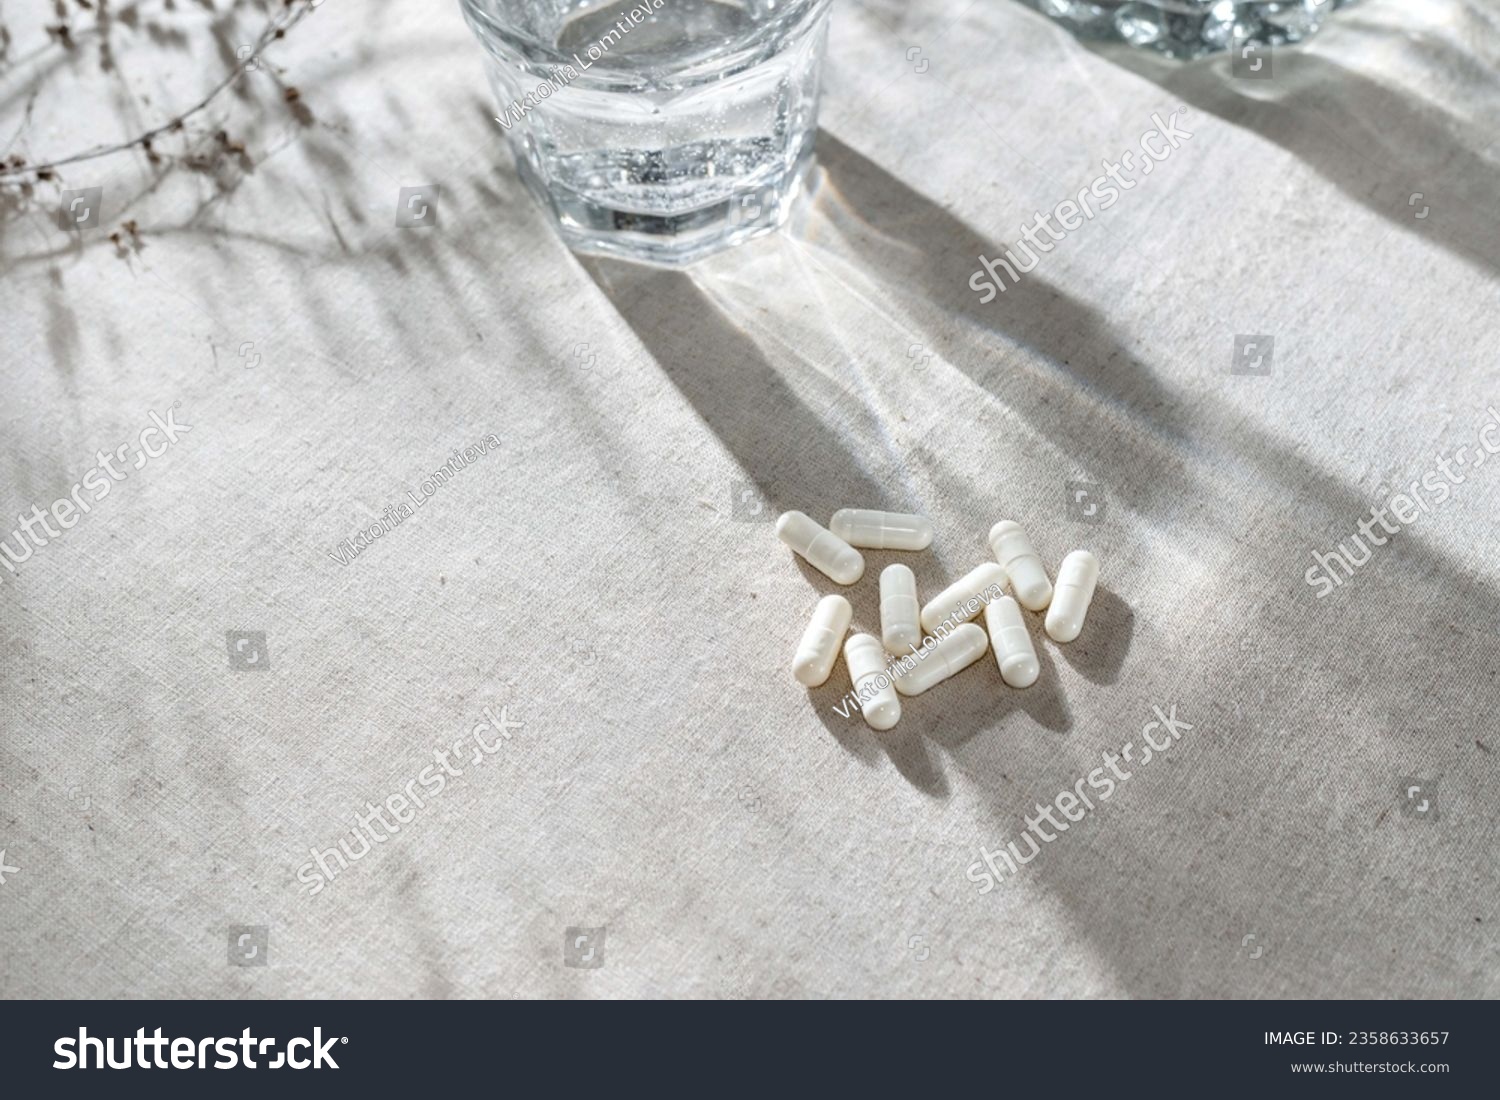 White capsules, glass with water and dried grass on neutral beige linen tablecloth with aesthetic light shadows. #2358633657